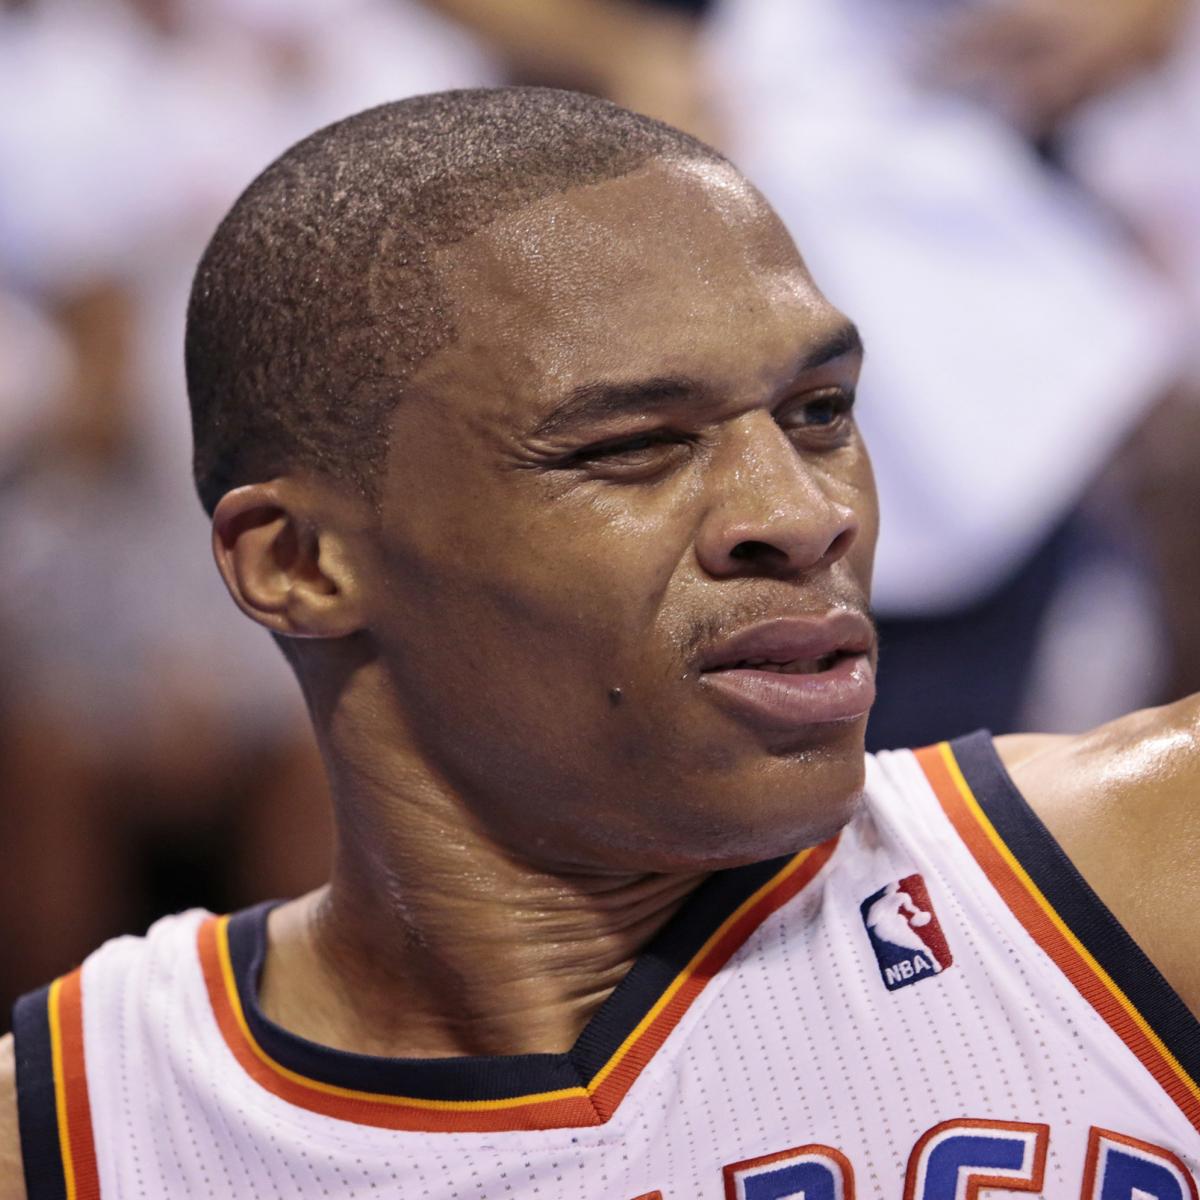 NBA 75: At No. 46, Russell Westbrook is a mercurial, private